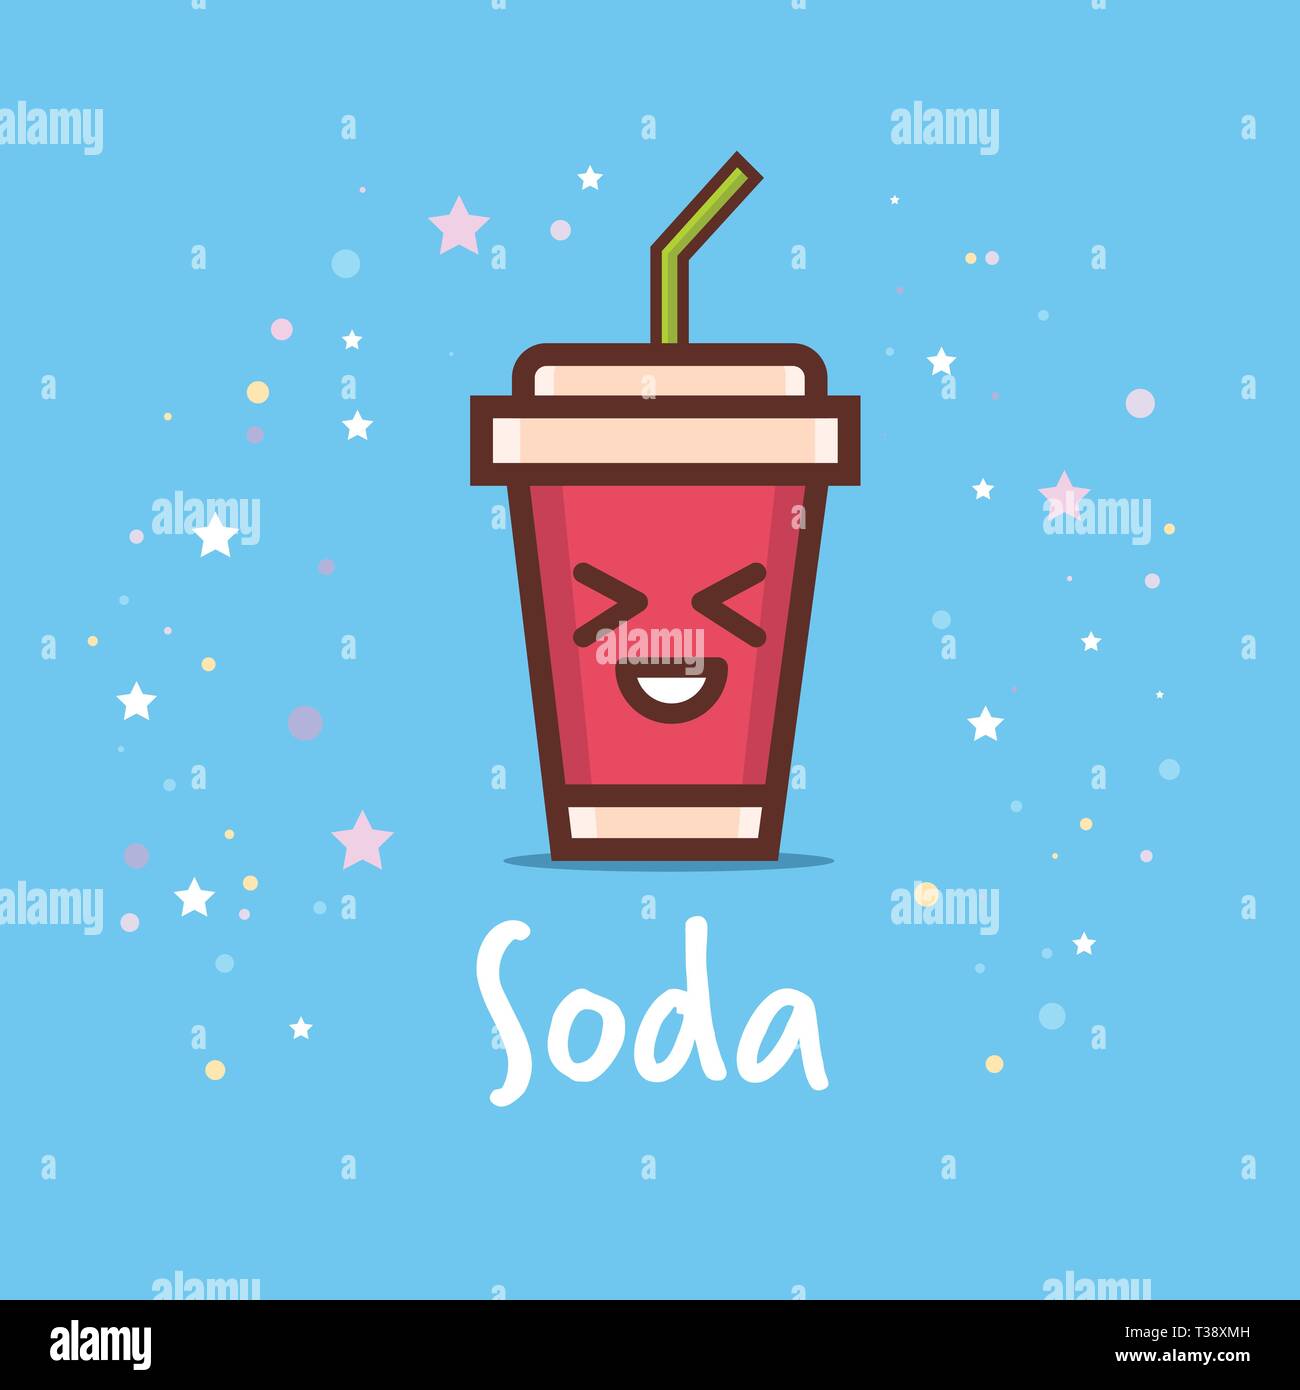 cute cup of soda cartoon comic character with smiling face happy emoji kawaii style fresh drink concept vector illustration Stock Vector